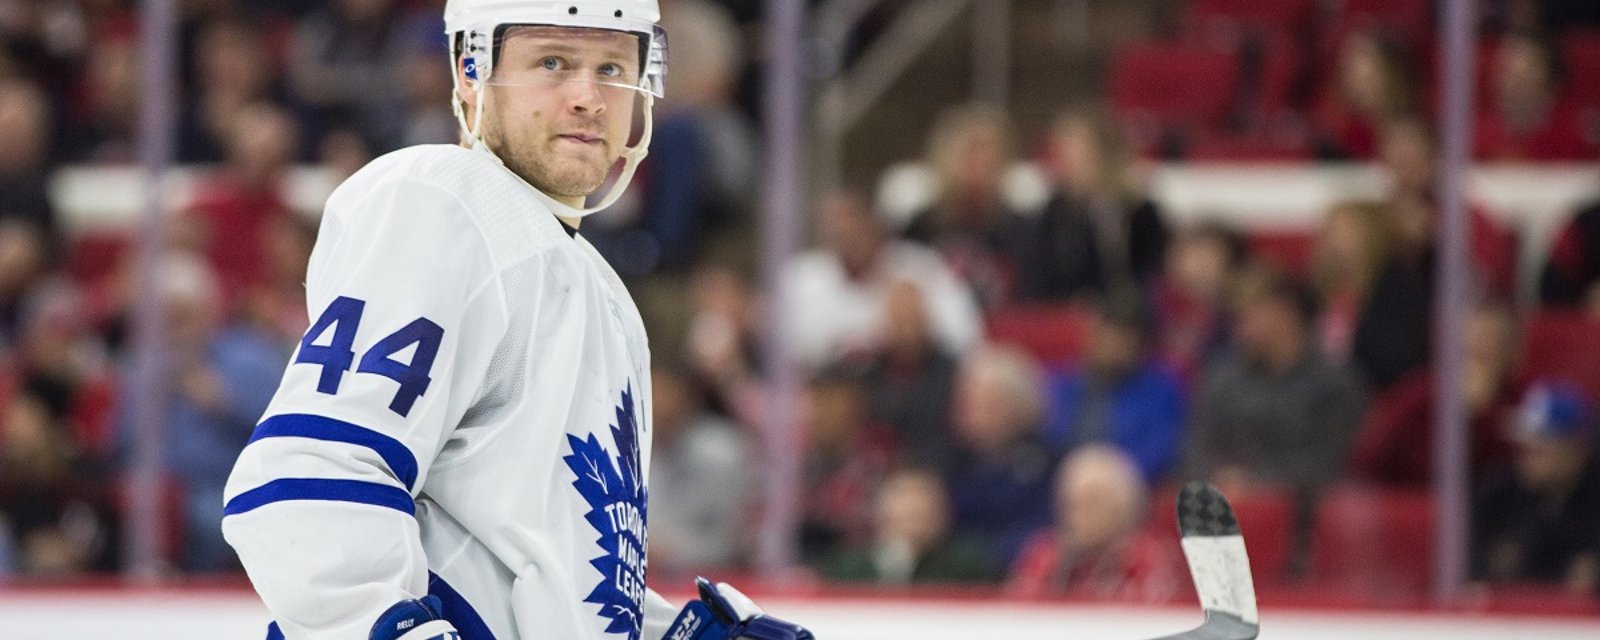 Surprising updates on both Morgan Rielly and Jake Muzzin from the Leafs.